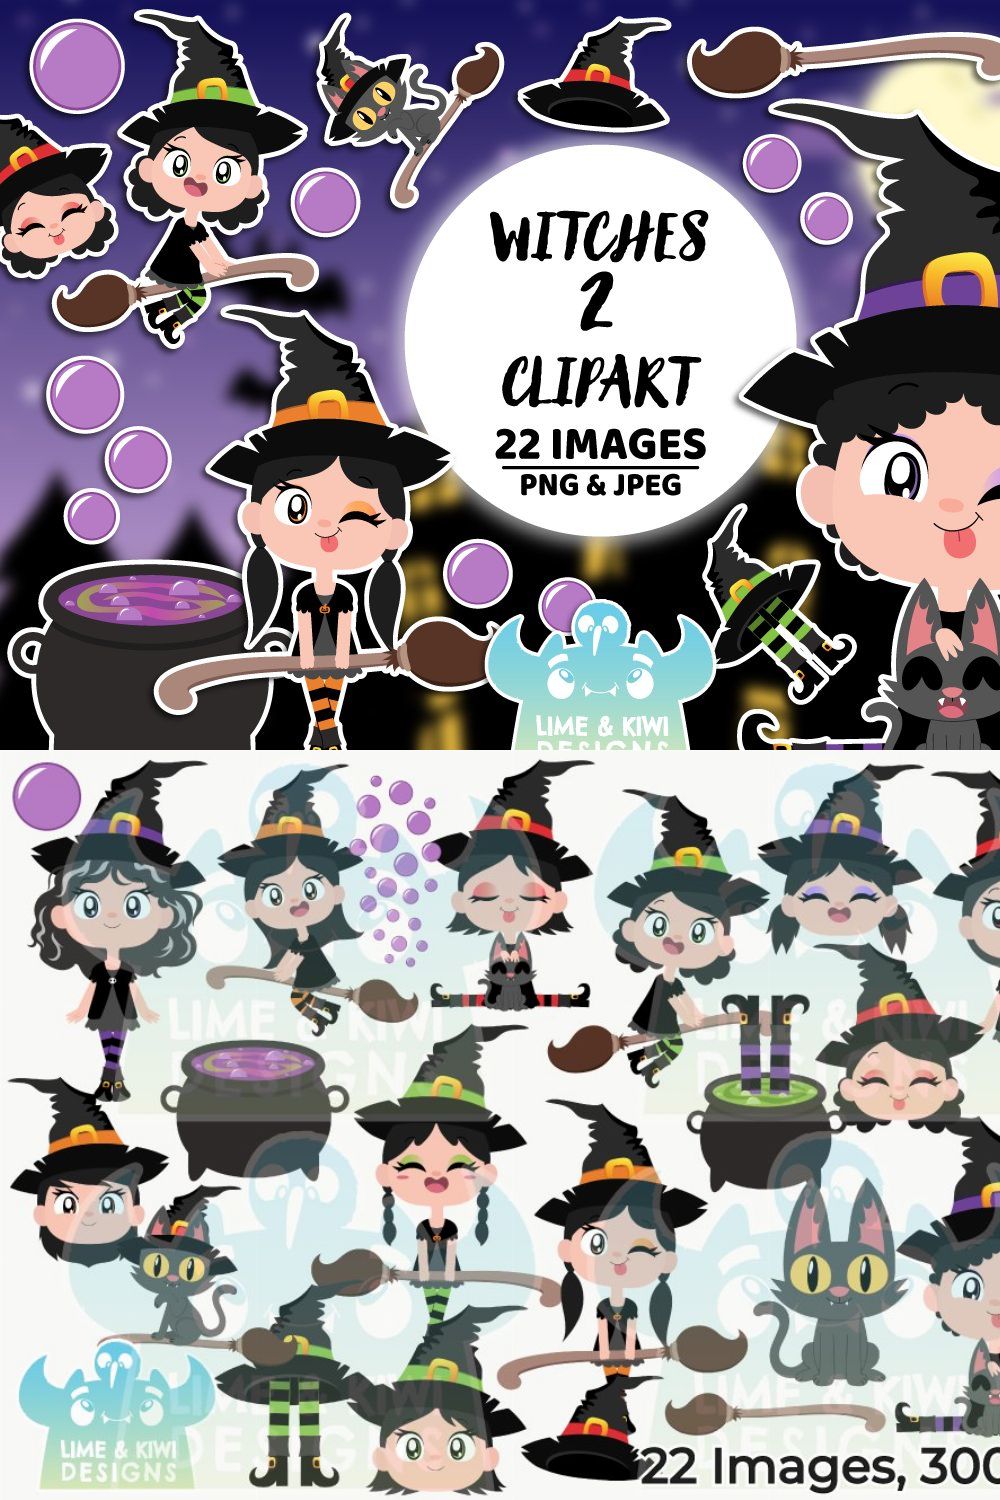 Wicked Witches 2 Clipart pinterest preview image.